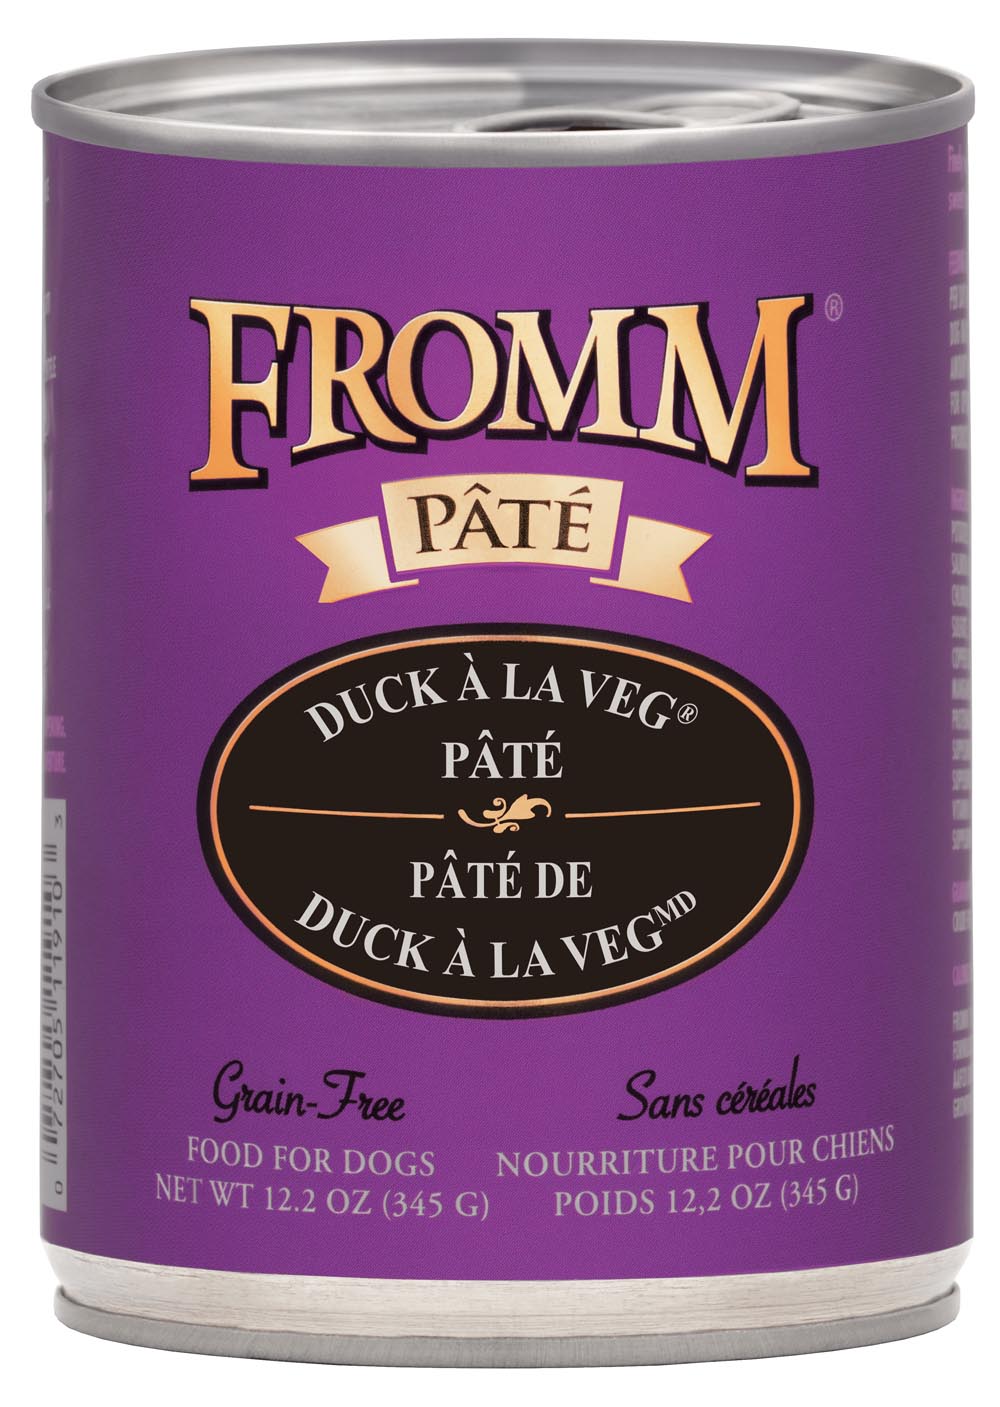 Fromm Duck A La Veg Pate Food for Dogs, 12.2 OZ